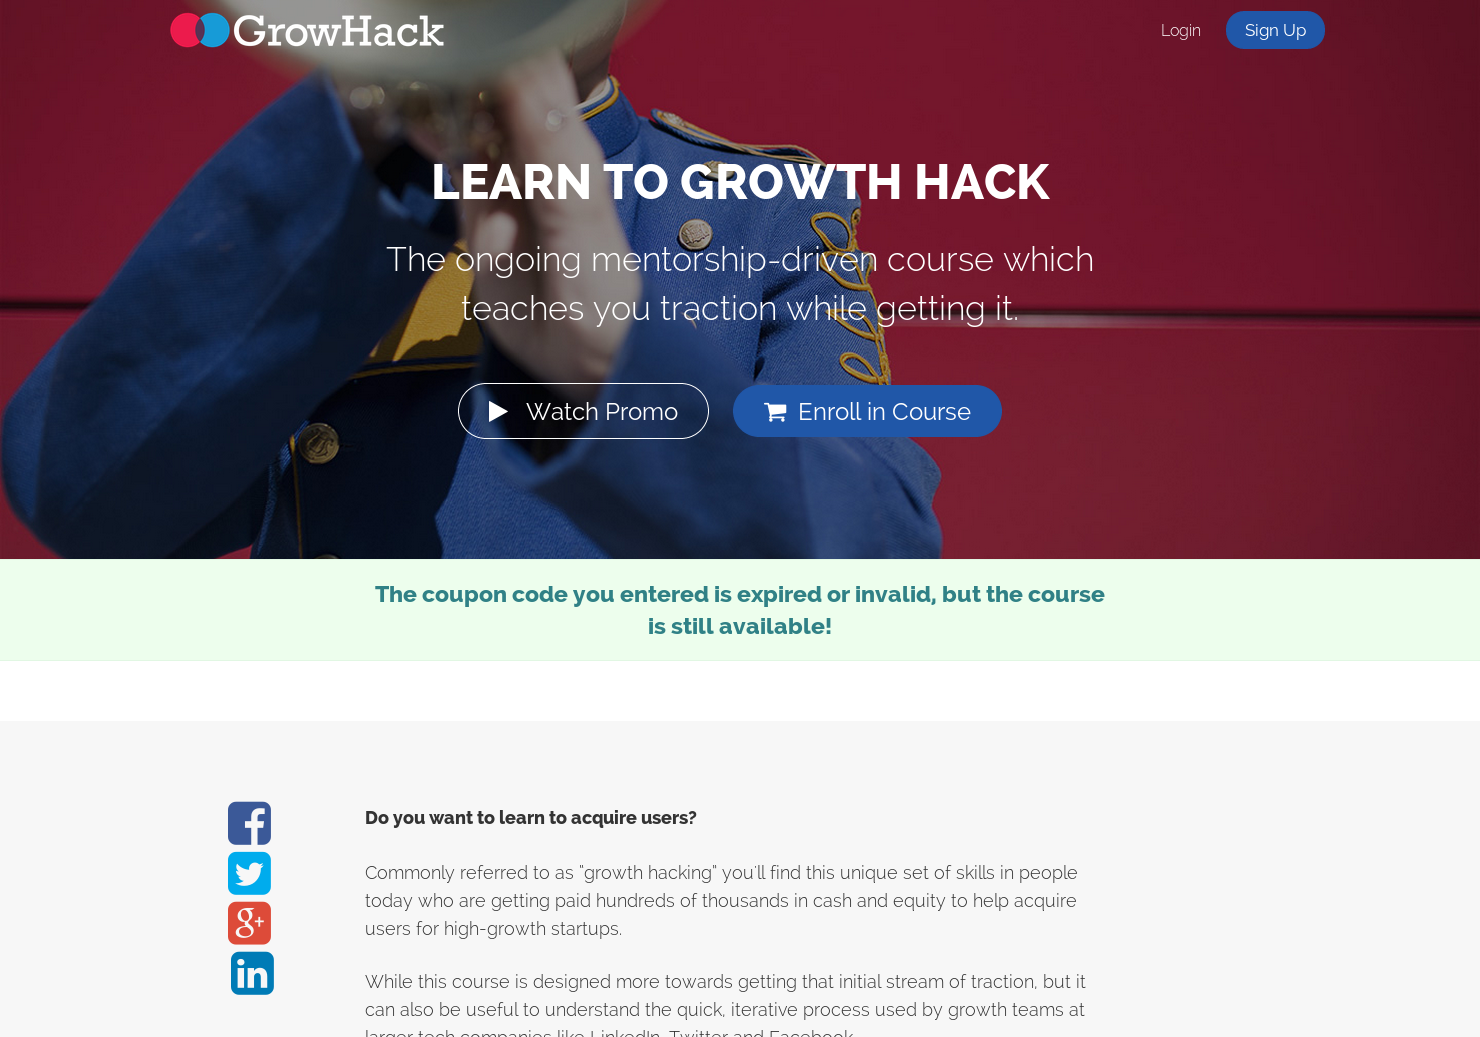 Learn to Growth Hack